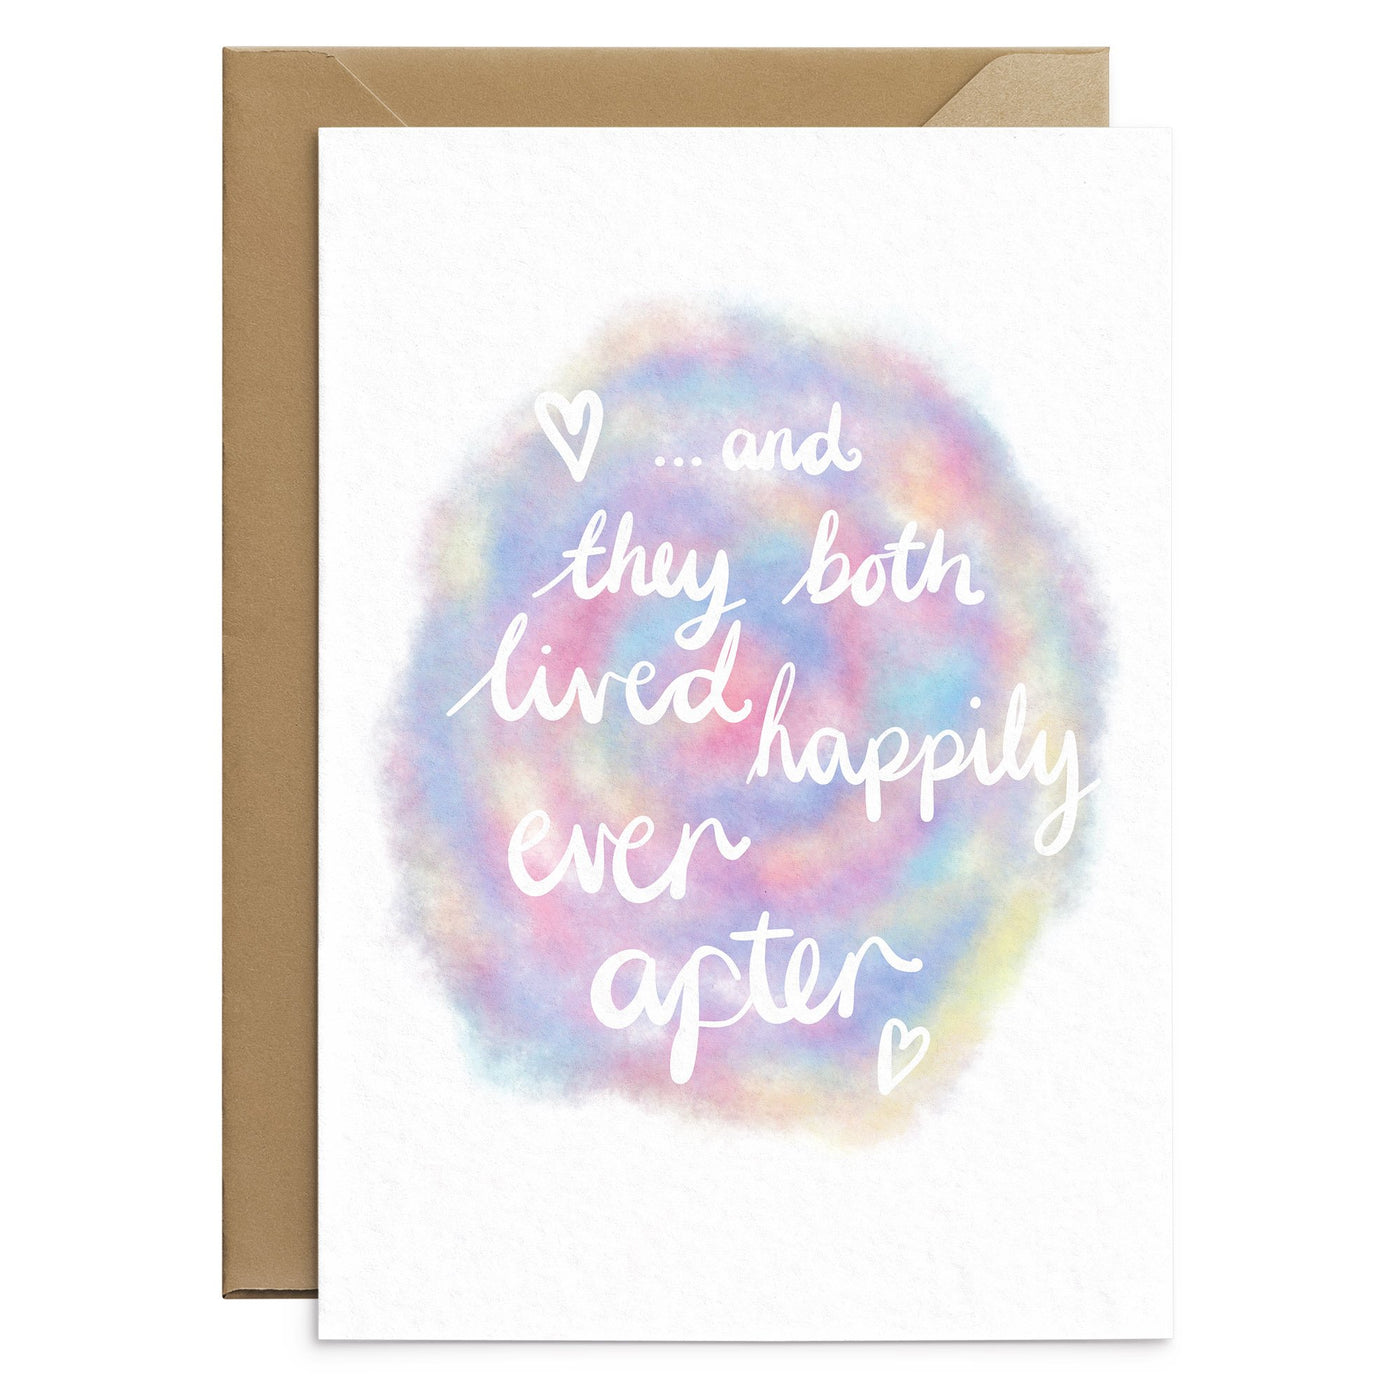 Happily Ever After Card Pastel - Poppins & Co.